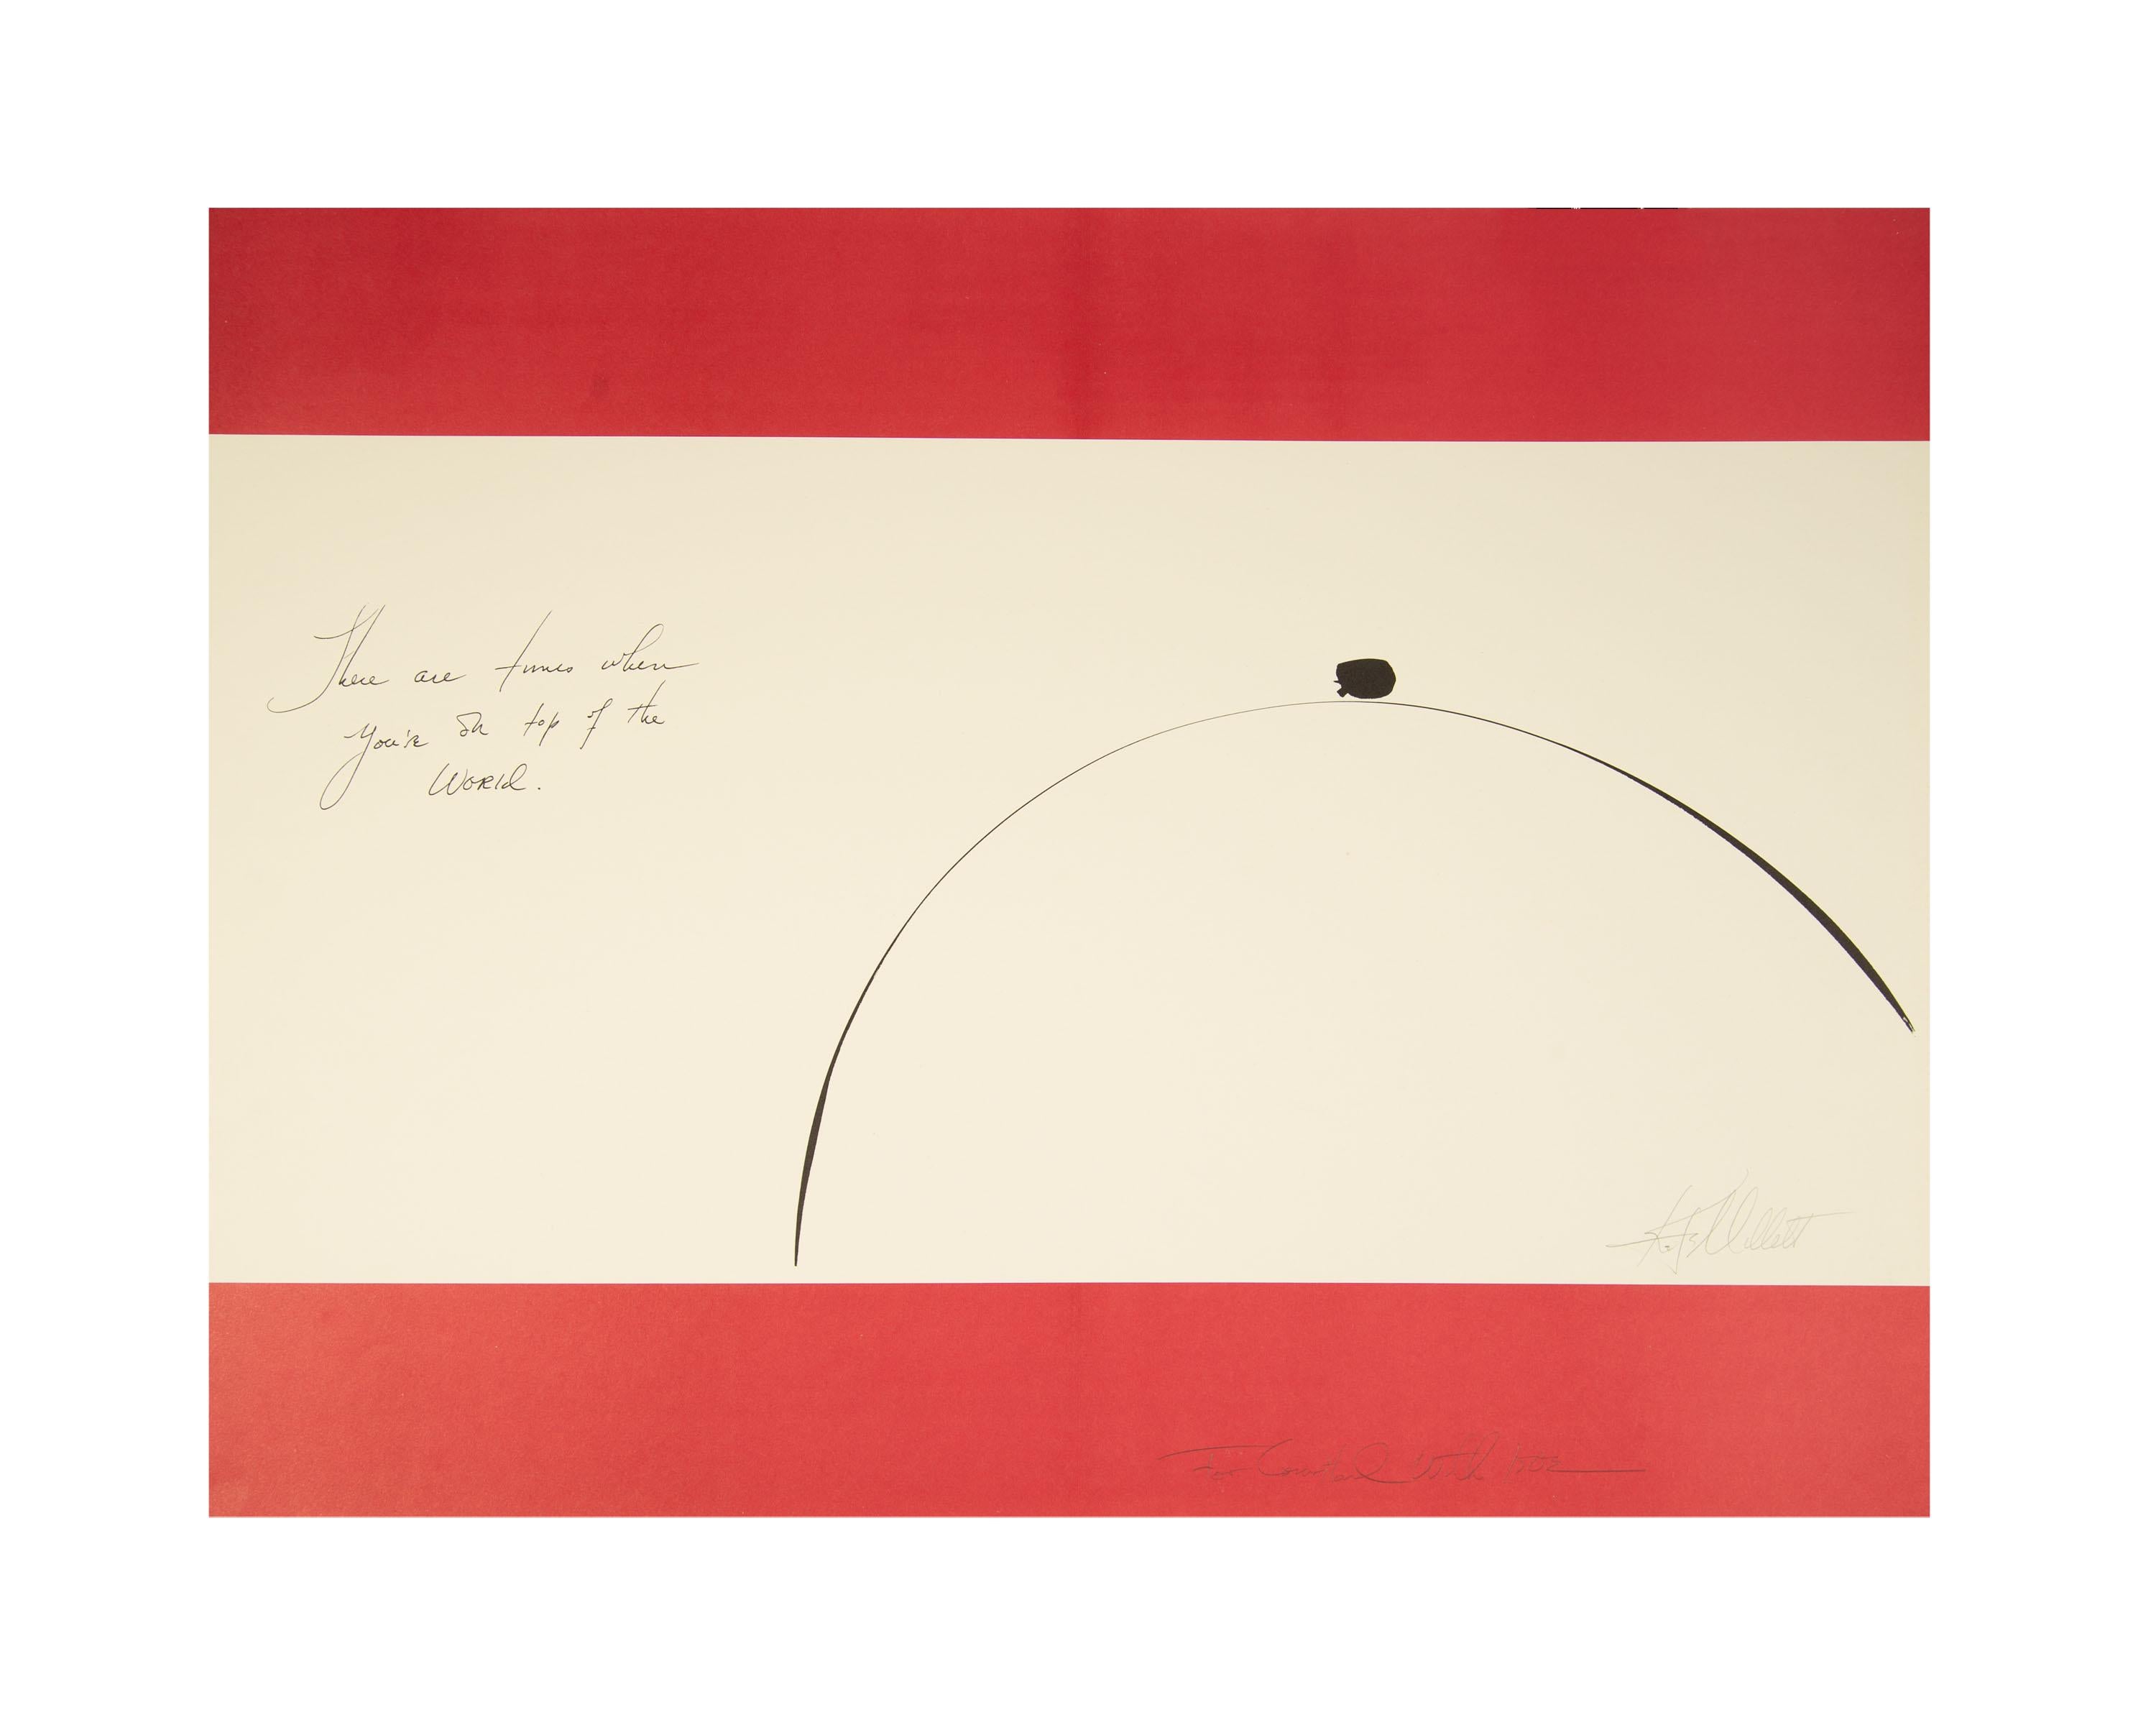 A signed and inscribed lithograph on paper by American feminist writer, theorist, artist and academic, Kate Millett (1934 - 2017). This work uses a minimal style to depict an abstract breast. To the the left of the image is a stanza of poetry. The